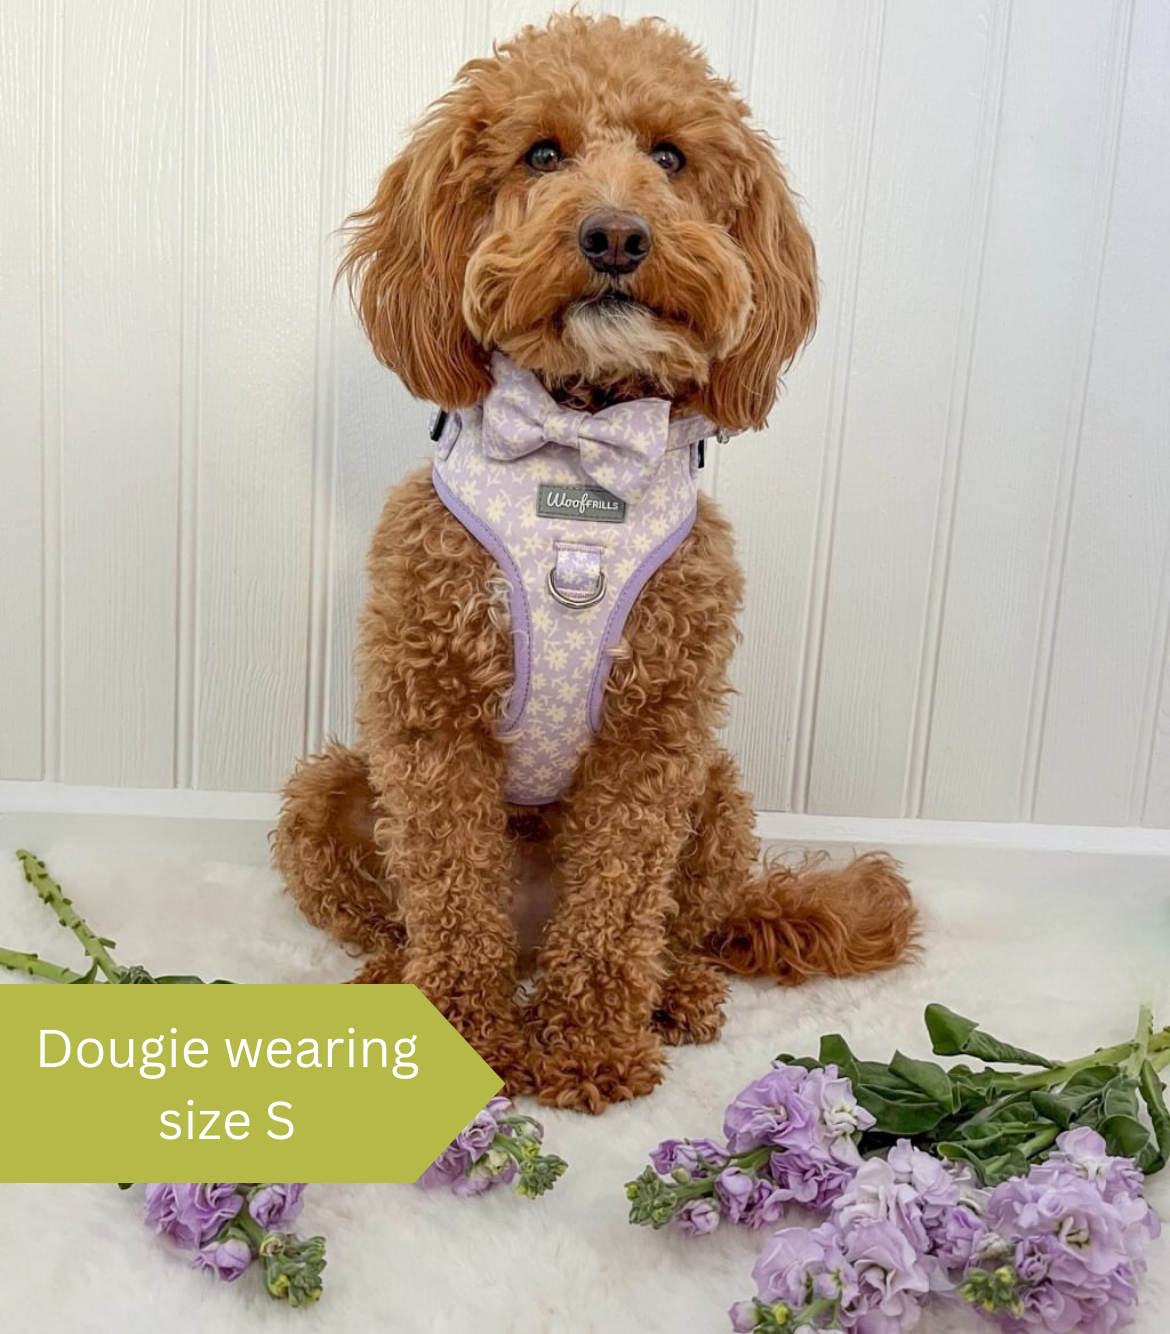 Cute dog wearing a daisy harness for dogs